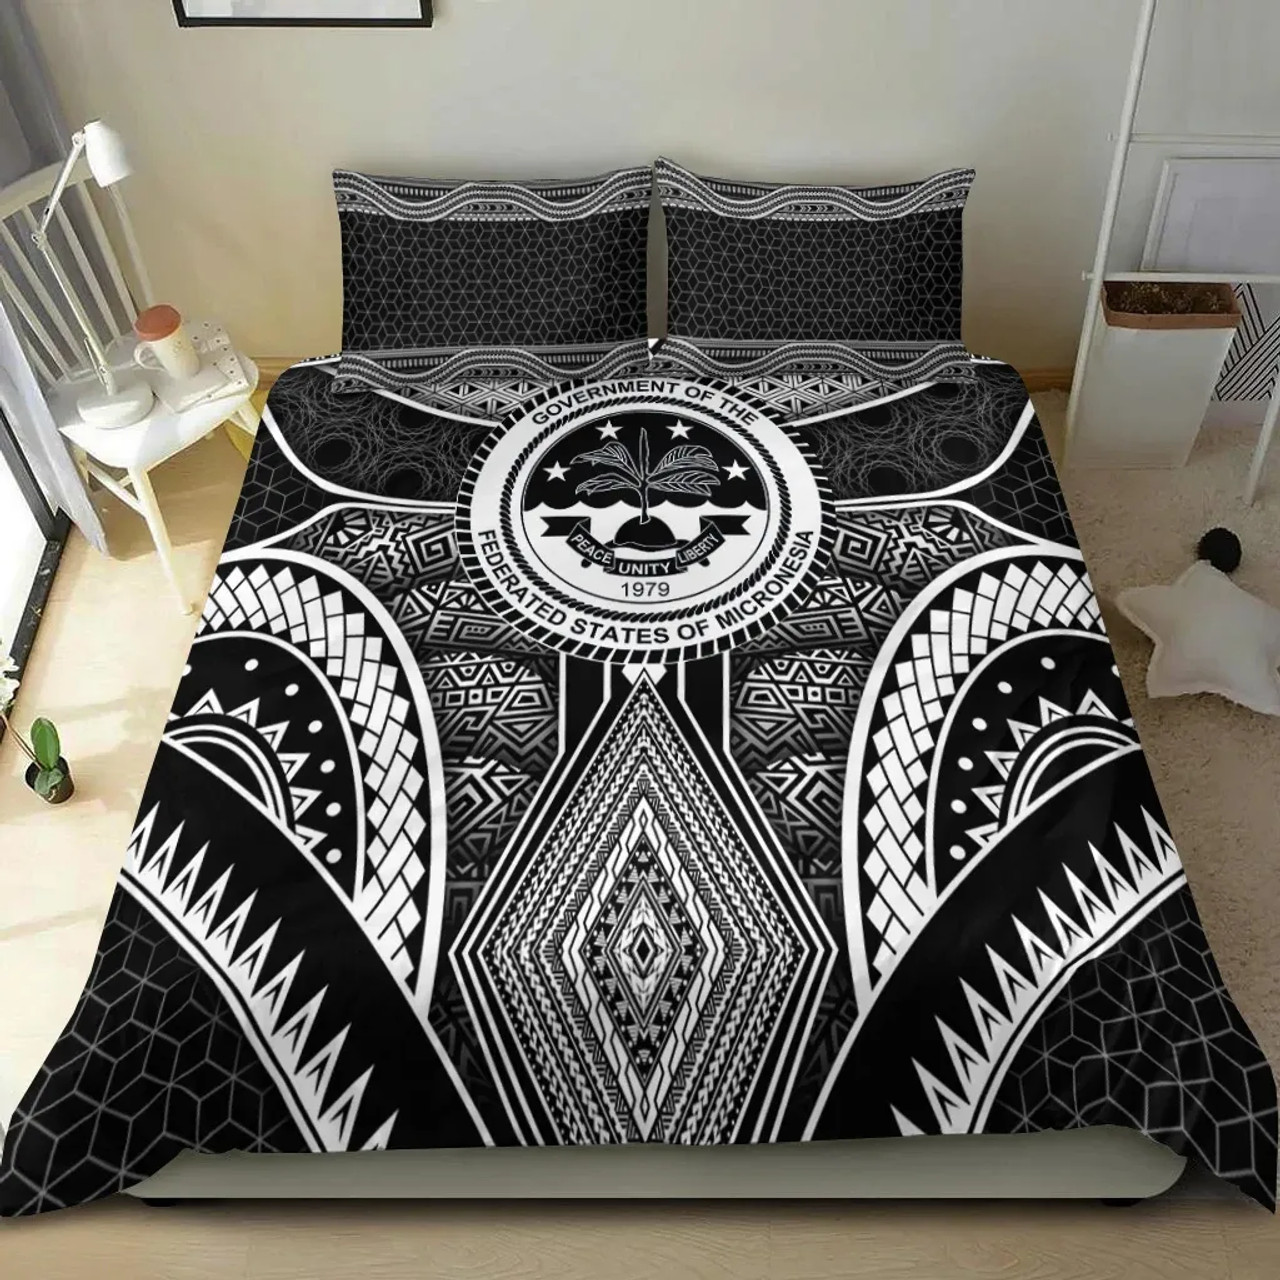 New Caledonia Bedding Set - Gold Tentacle Turtle 4